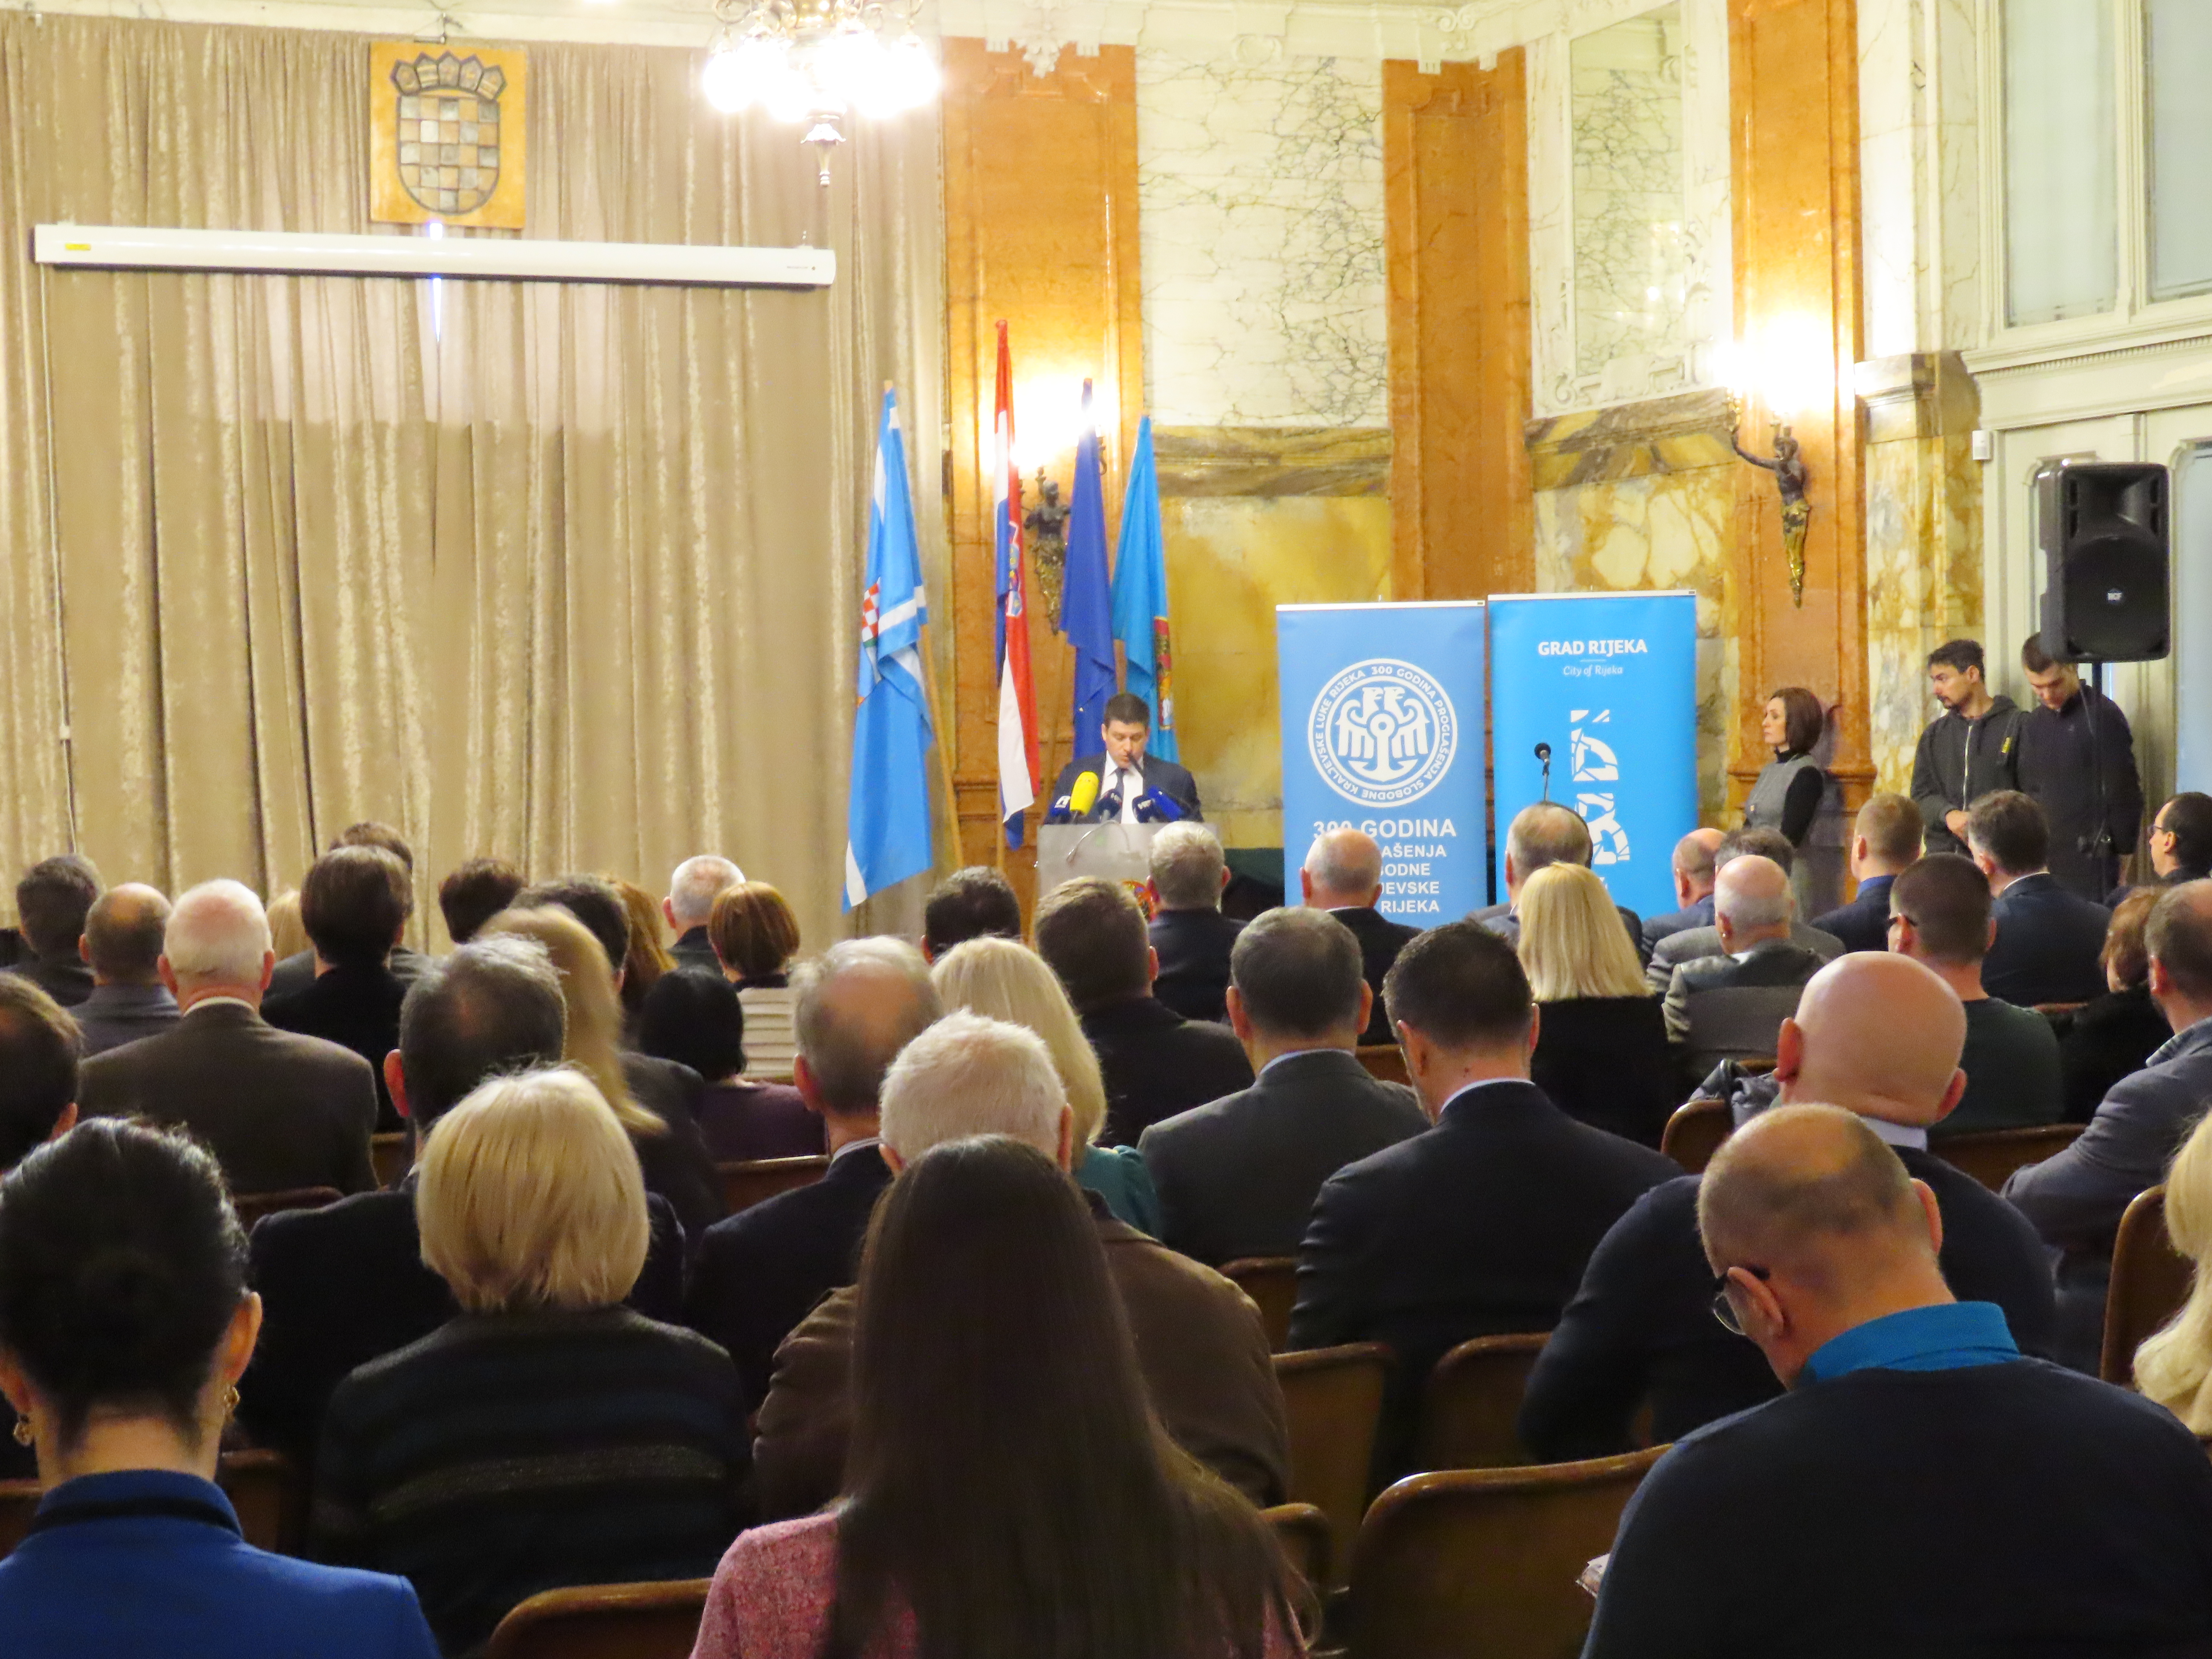 Ceremonial academy held on the occasion of the 300th anniversary of the proclamation of Rijeka as Free Royal Port